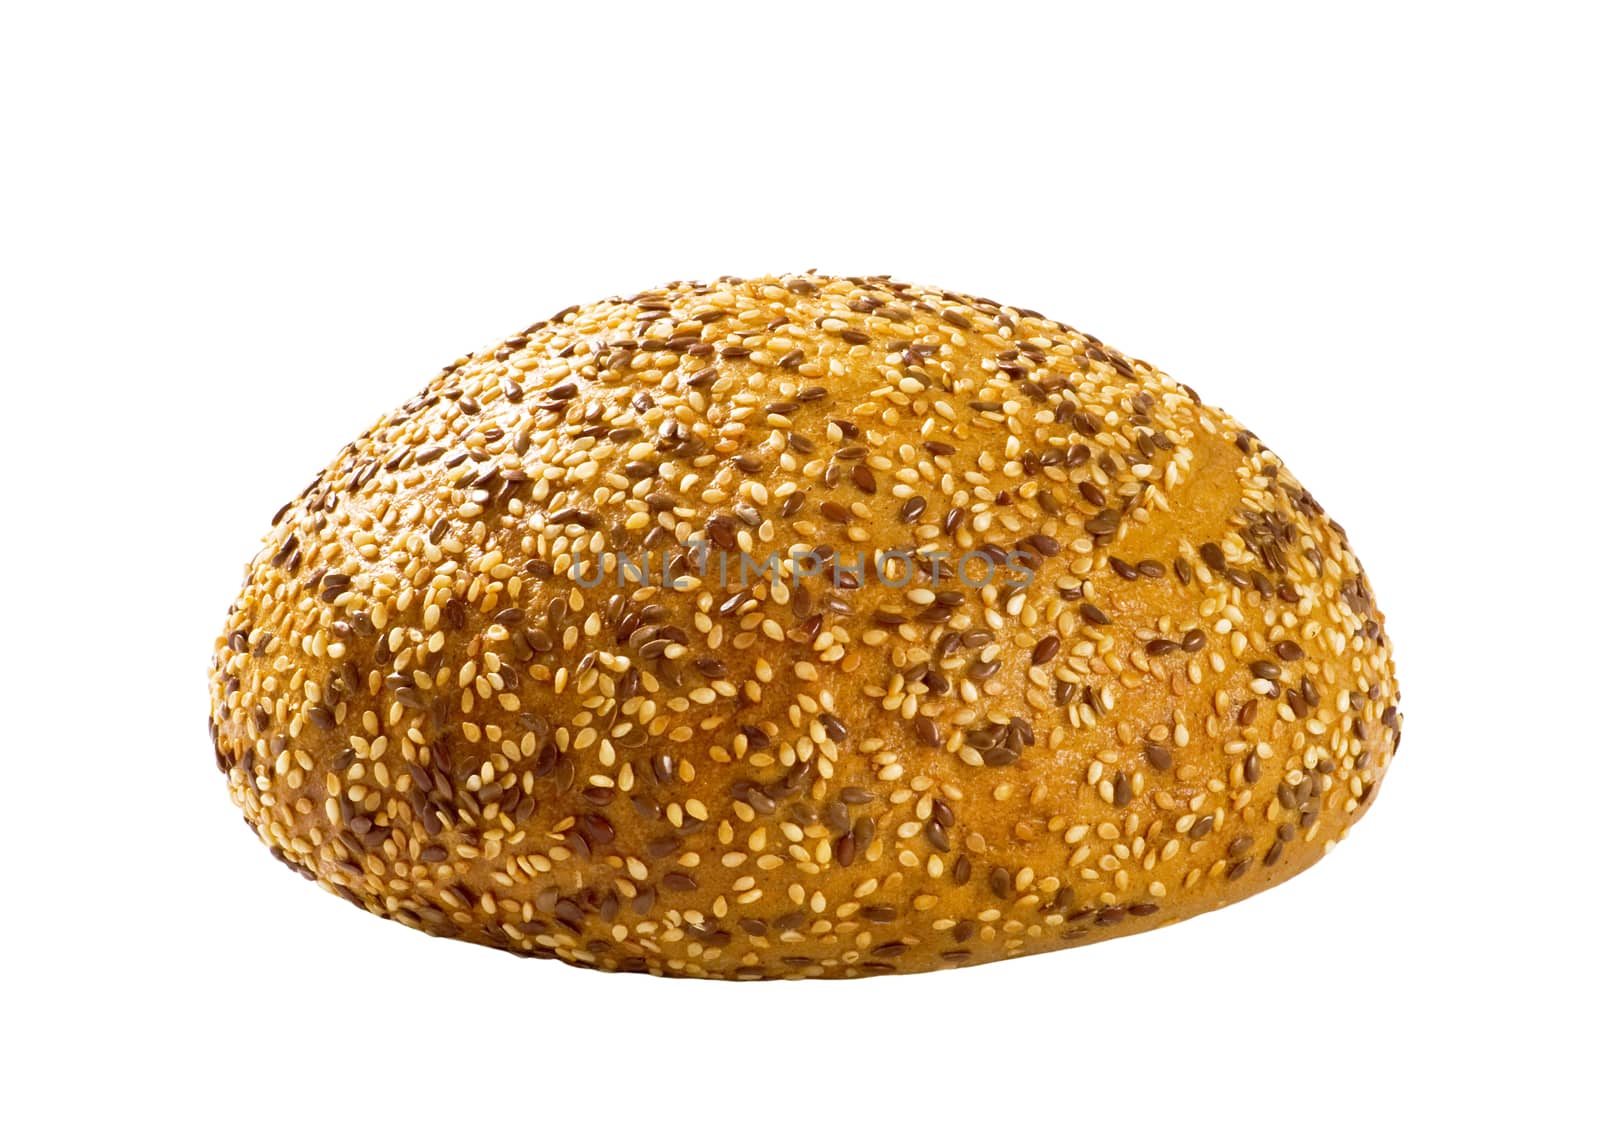 Bread with flax and sesame seeds
